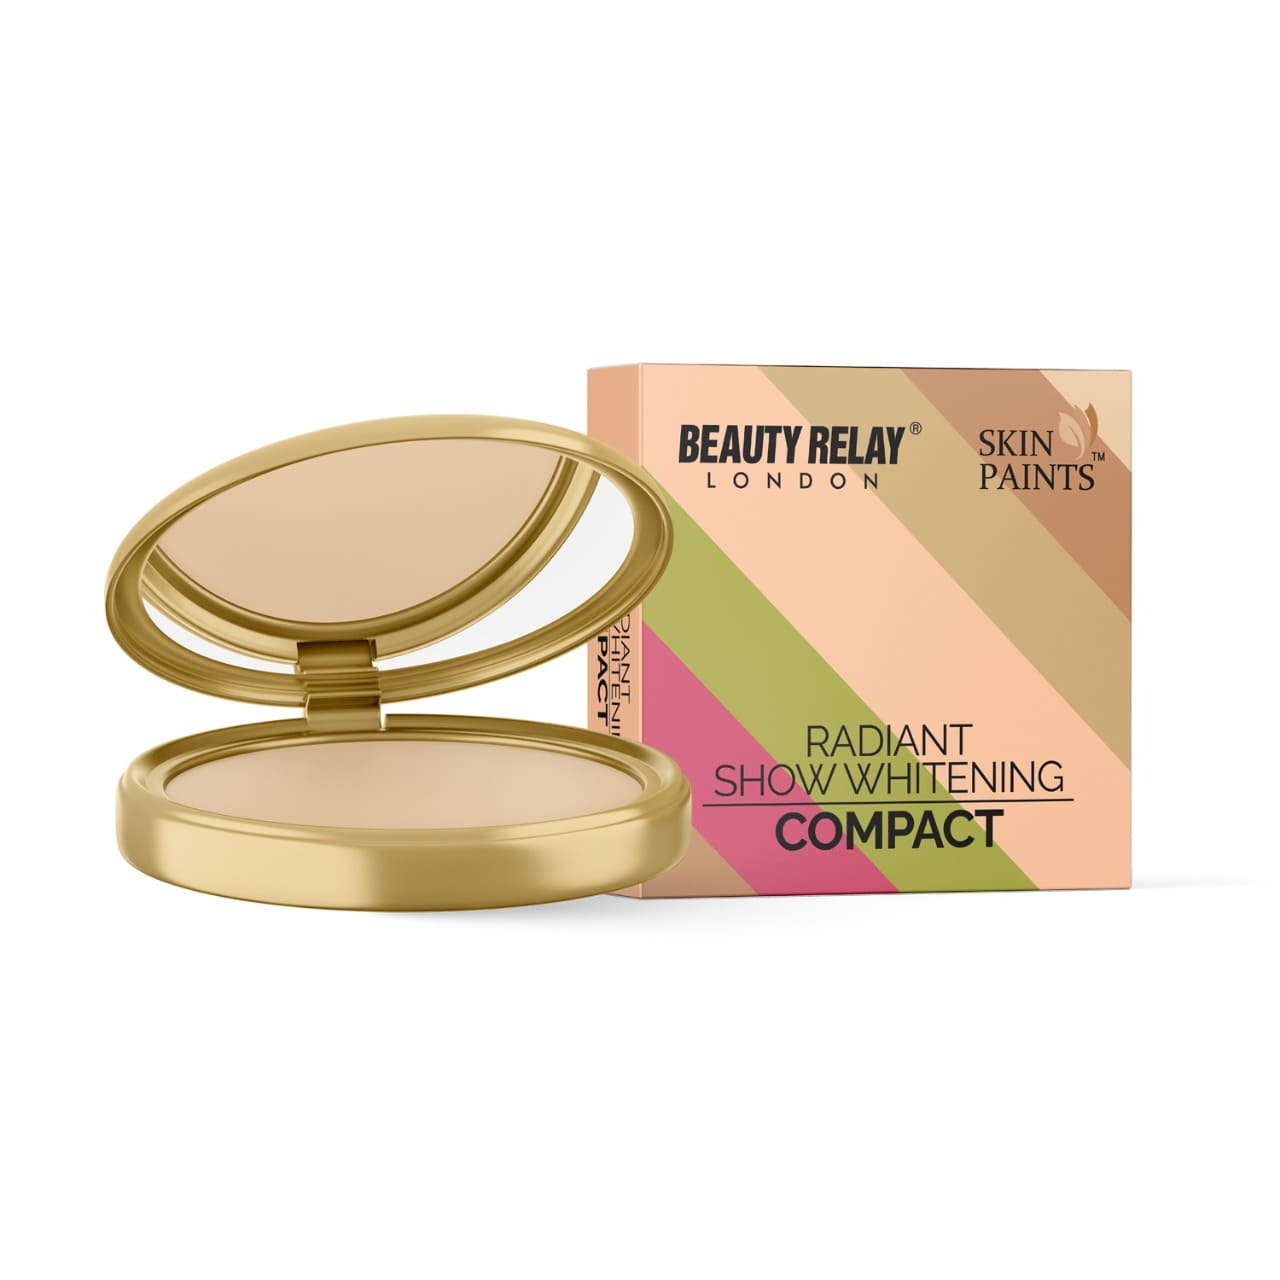 Radiant Show Whitening Compact powder